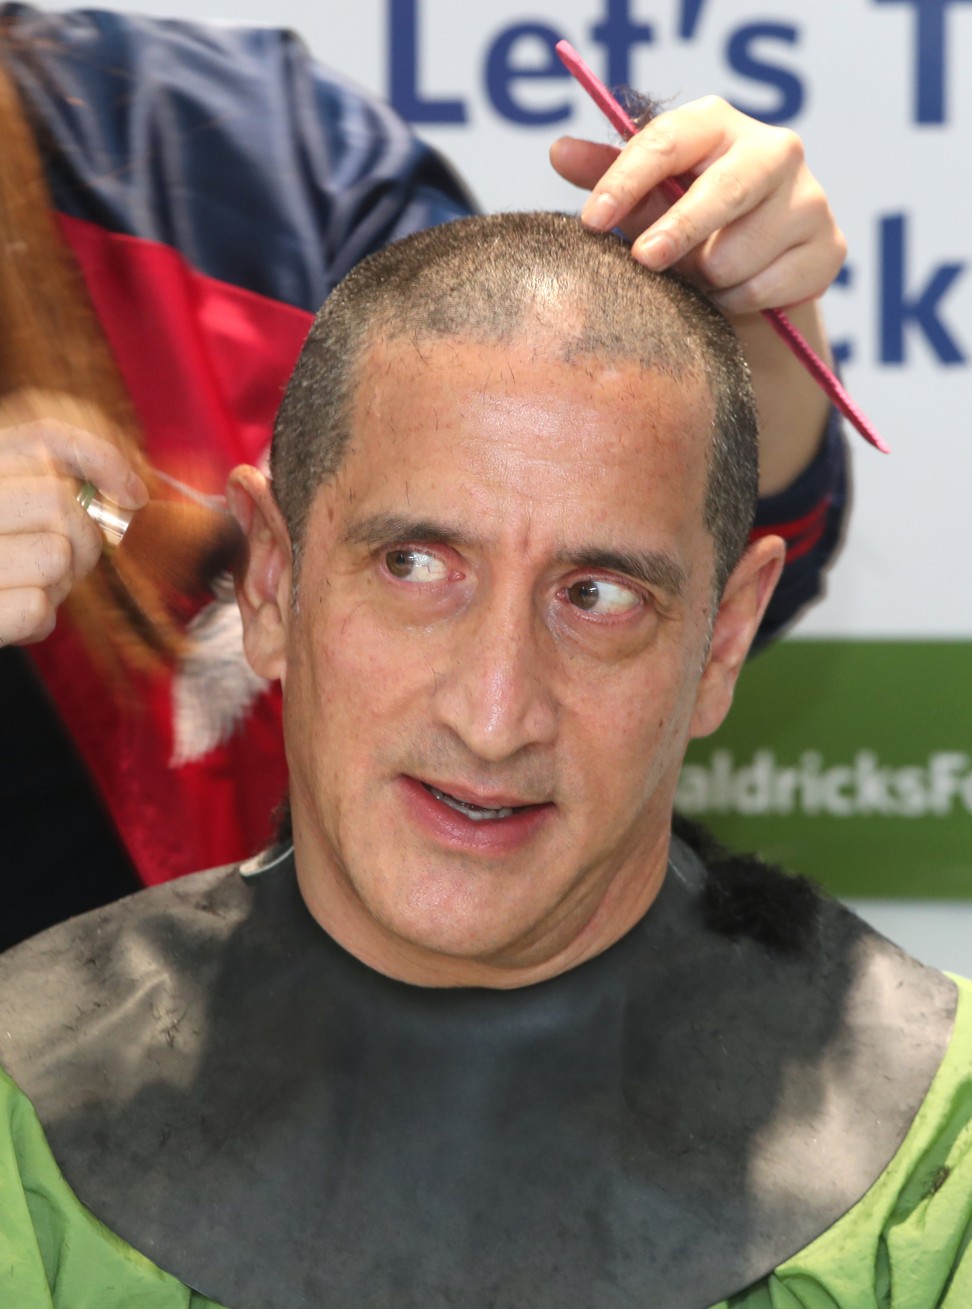 It is the eighth time in 10 years that Shane Akeroyd has had his head shaved for St Baldrick’s. Photo: K. Y. Cheng